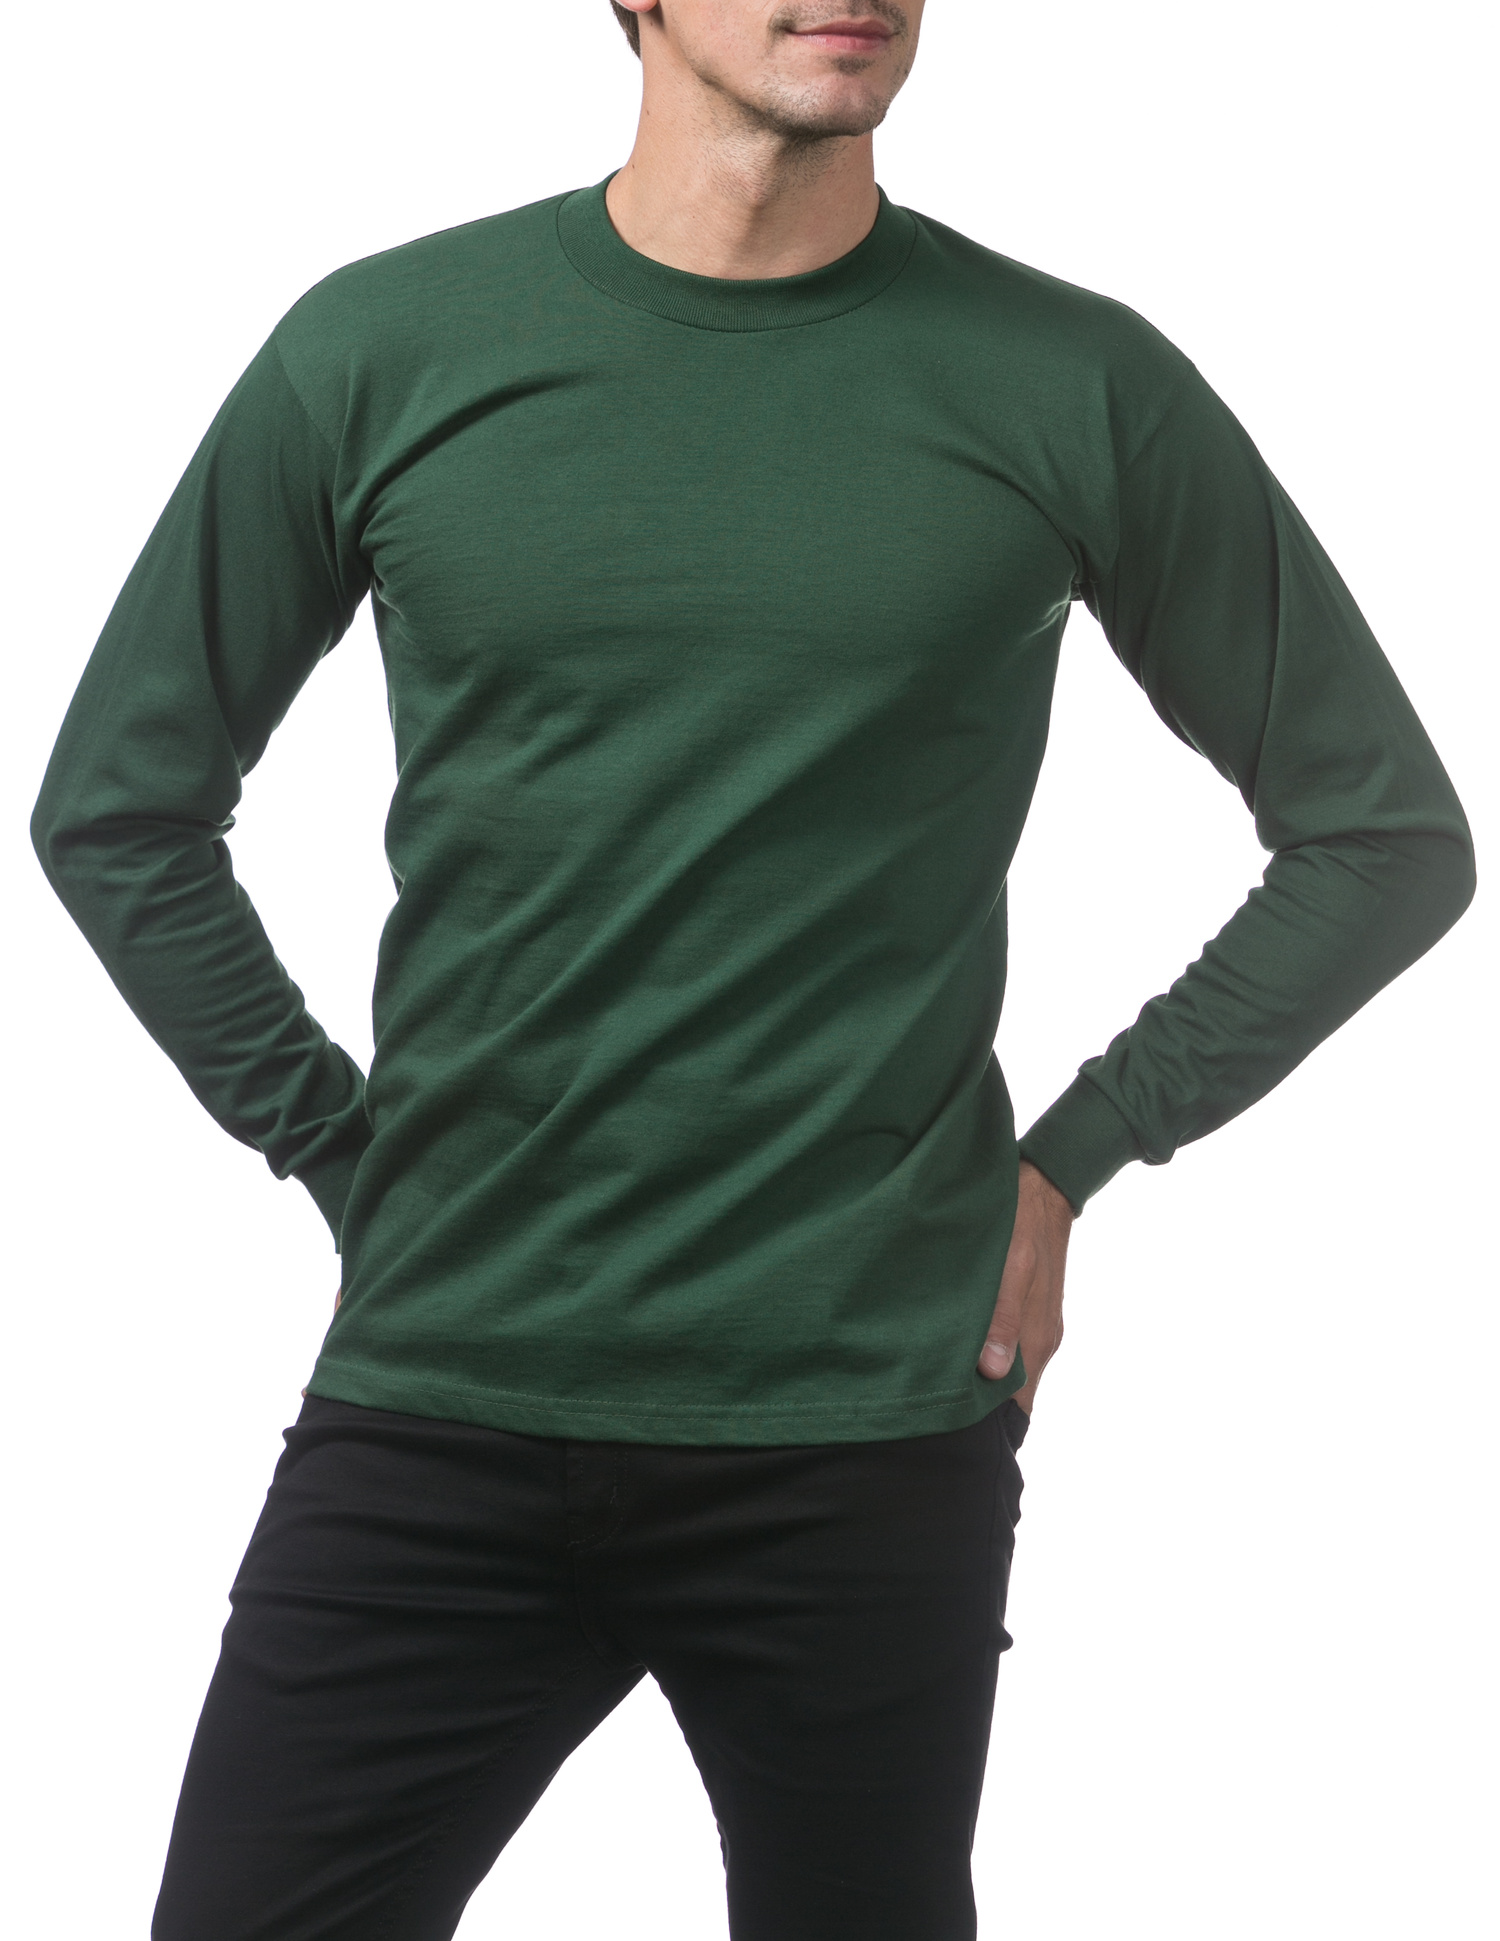 Hold Tight Long-Sleeve Shirt, Dark Forest